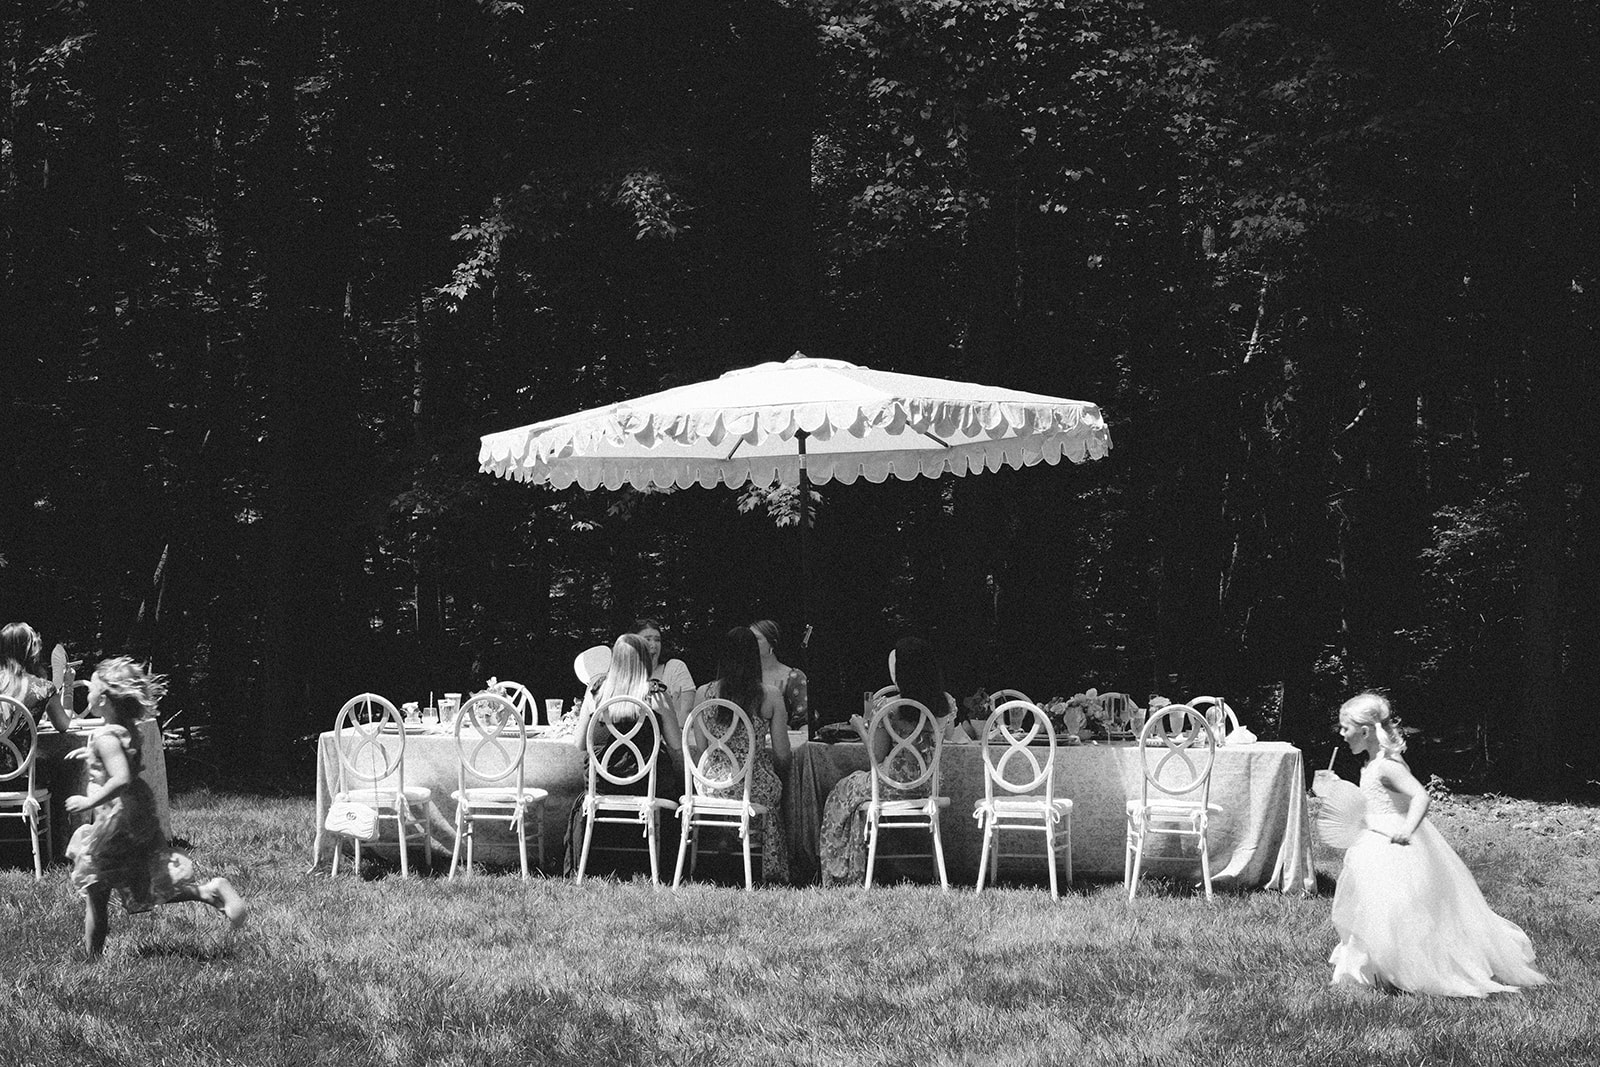 guests enjoying garden soiree baby shower black and white film image